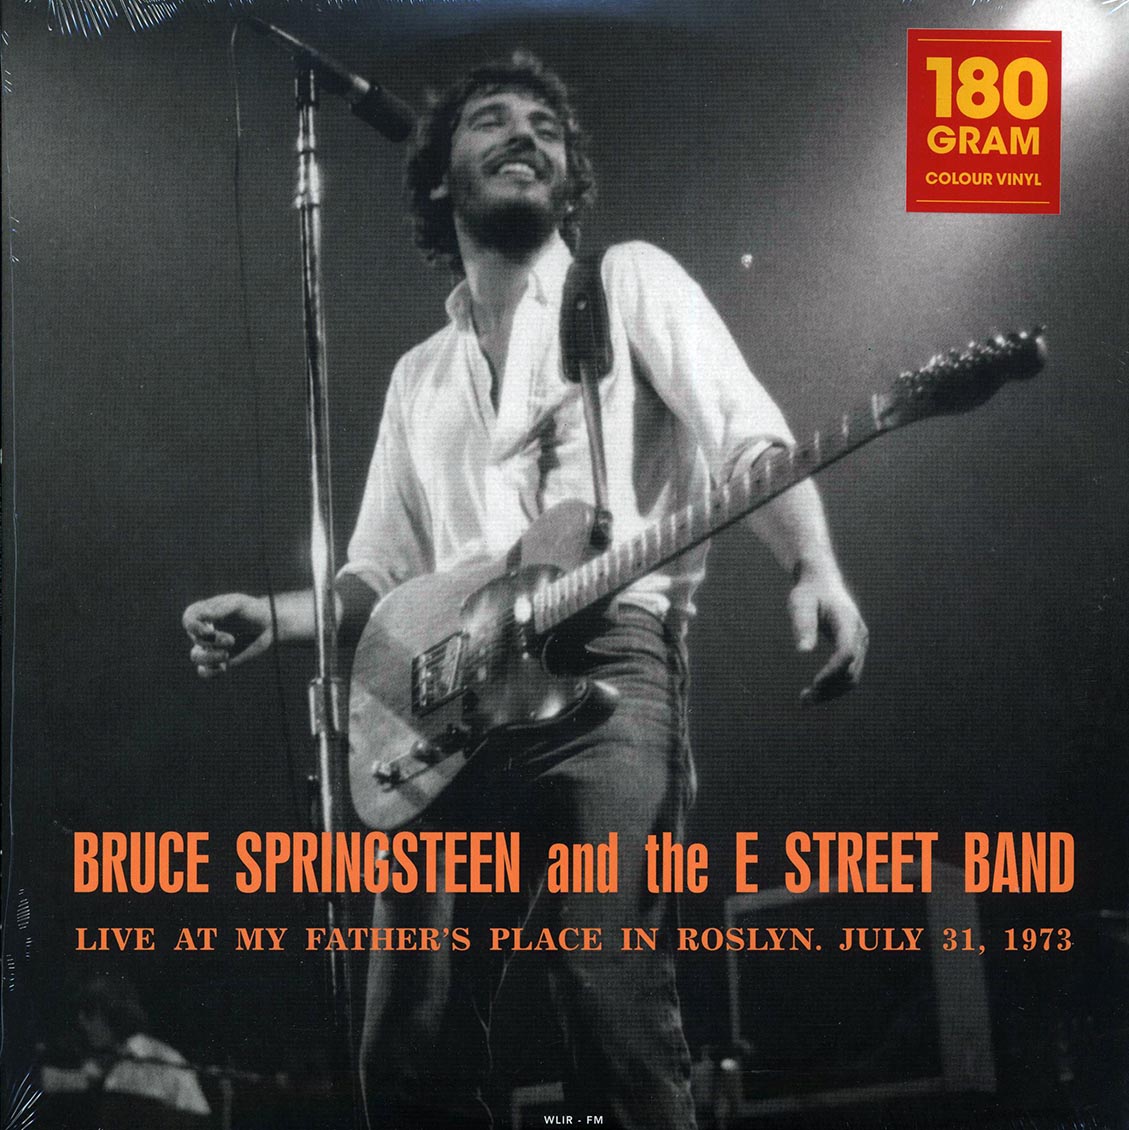 Bruce Springsteen & The E Street Band - Live At My Father's Place In Roslyn, July 31, 1973 (180g) (blue vinyl) - Vinyl LP